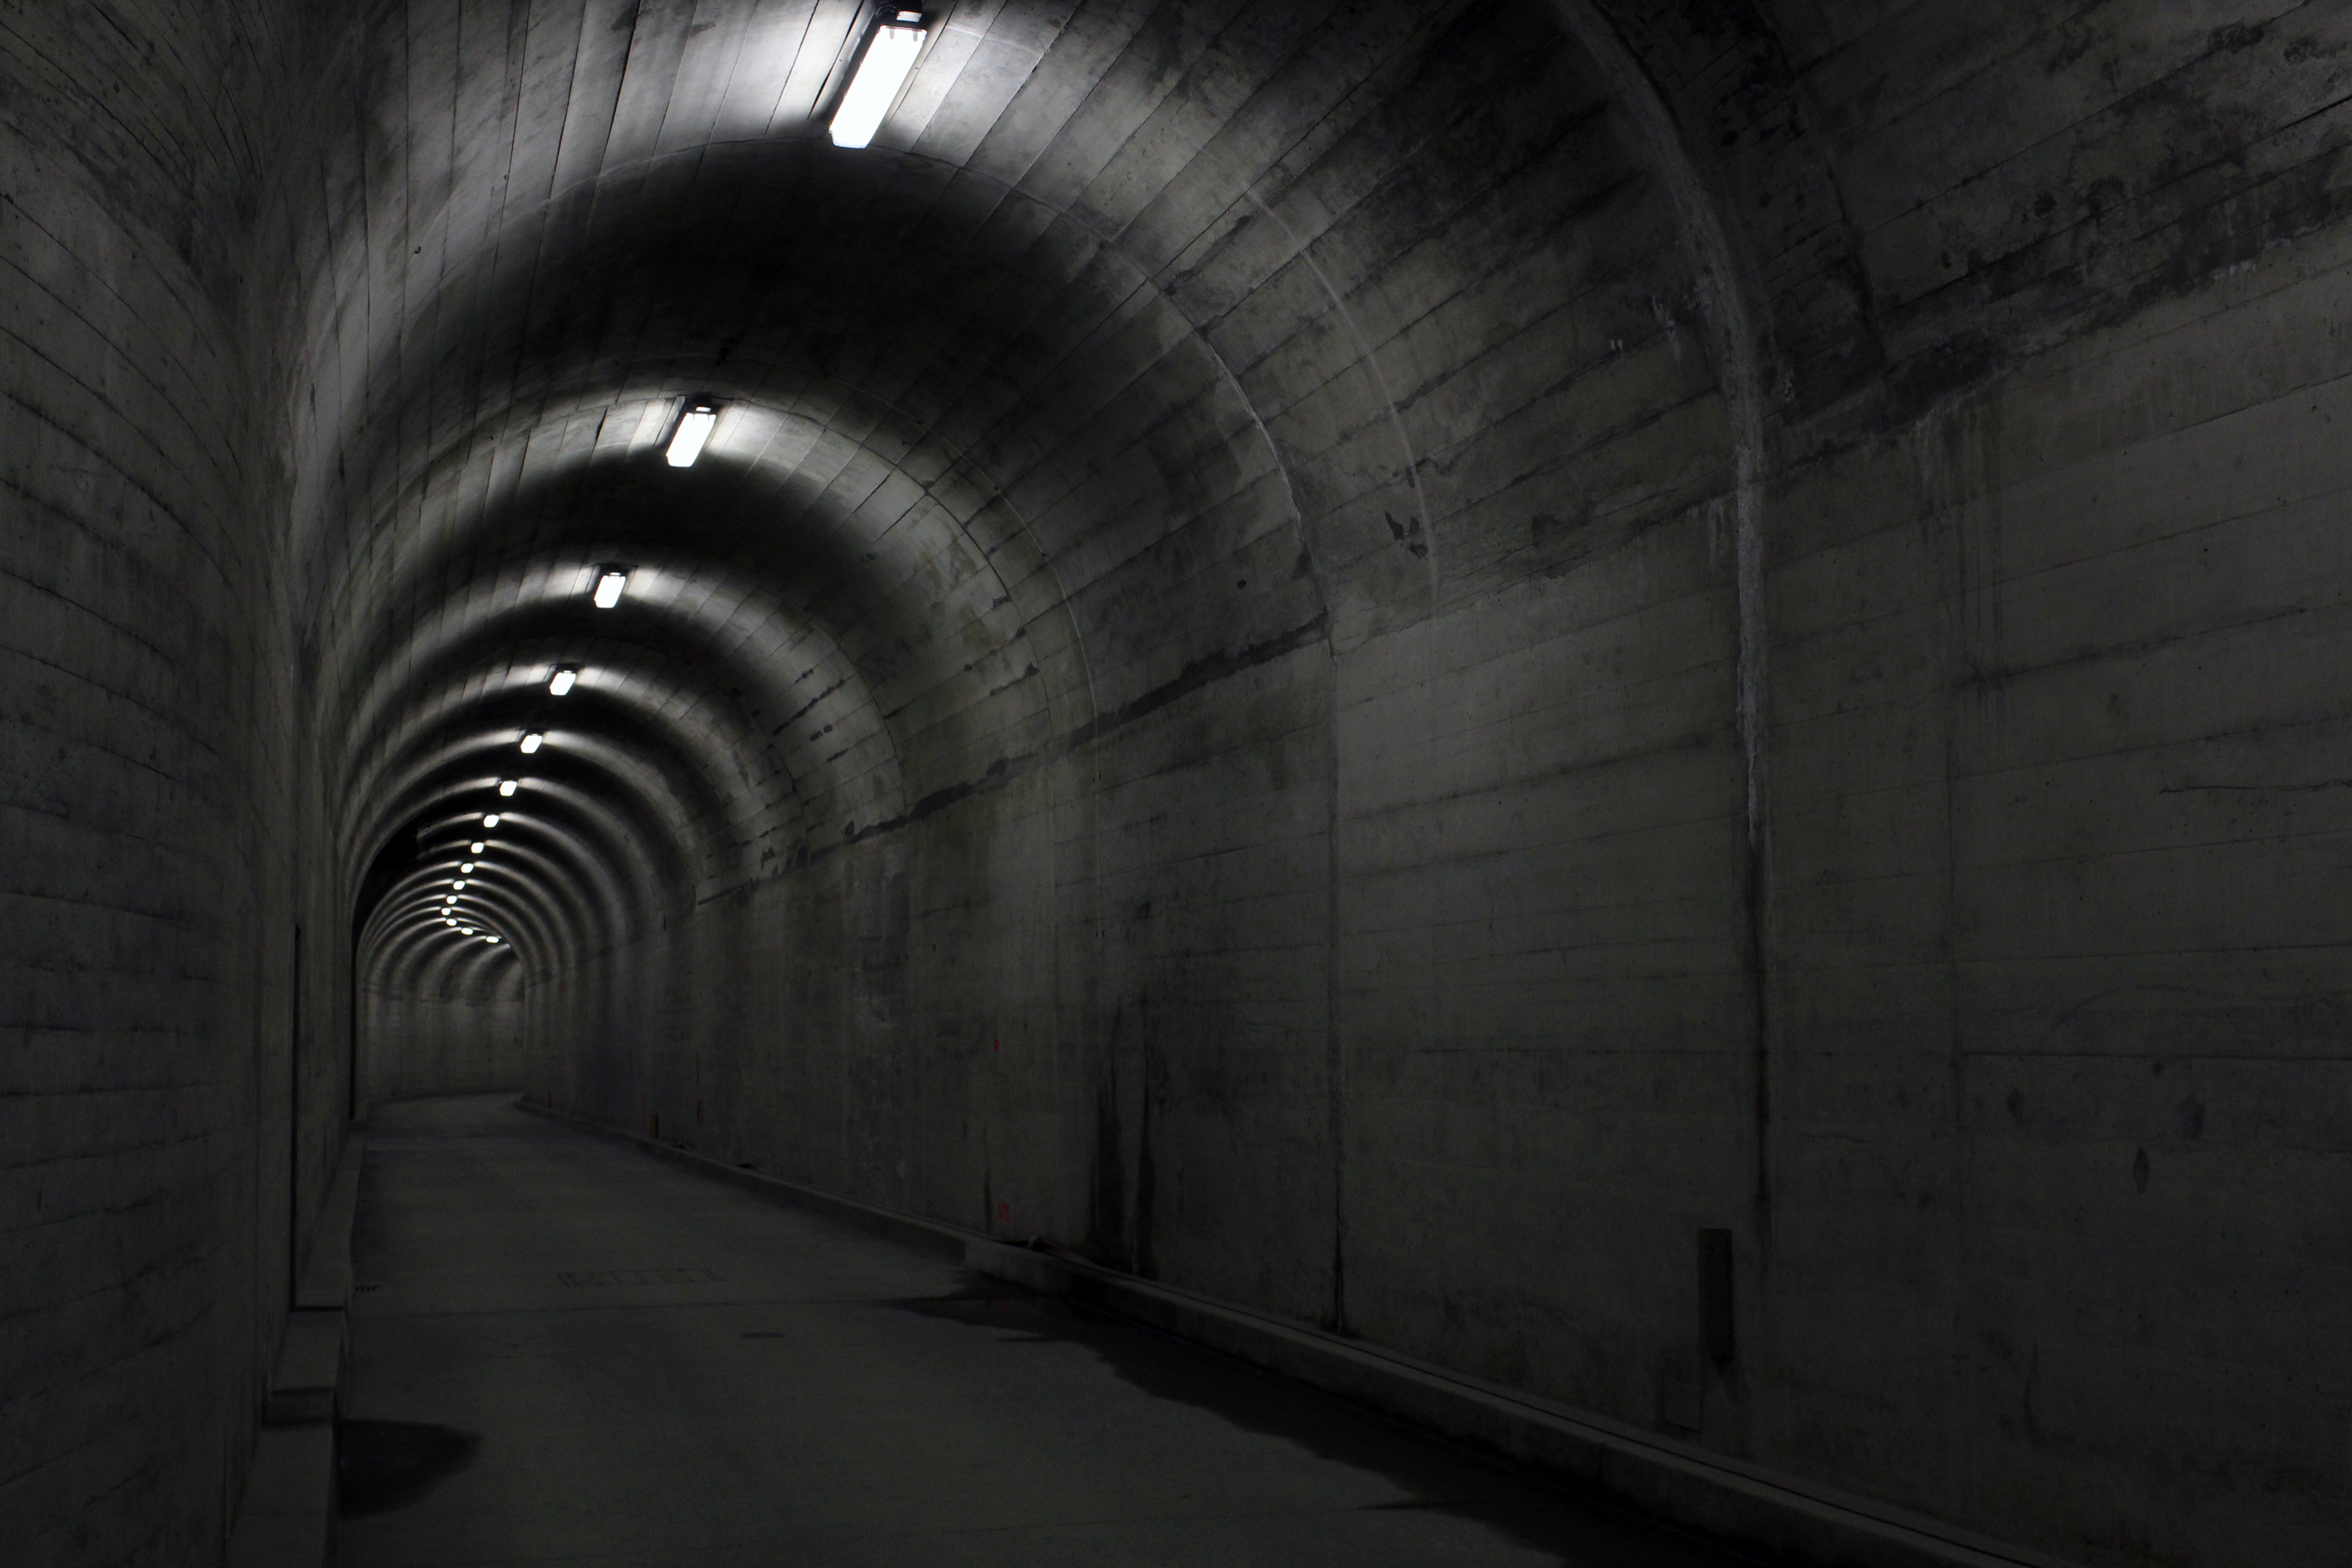 Free Images : light, architecture, building, tunnel, dark, subway ...